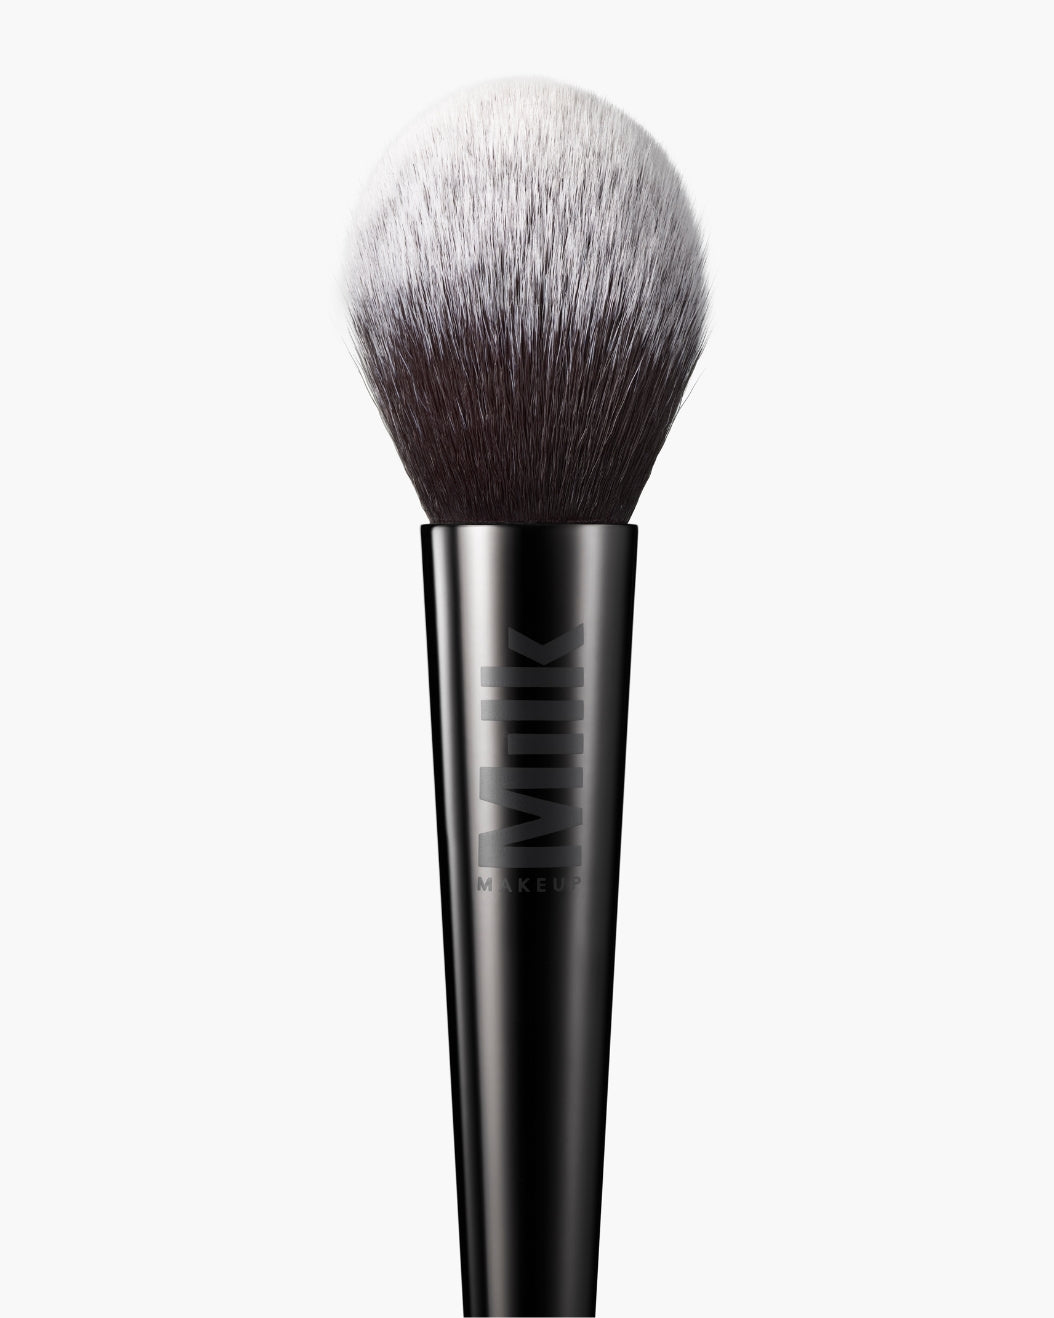 Close-up shot of the Milk Makeup Pore Eclipse Powder Brush against a white background.